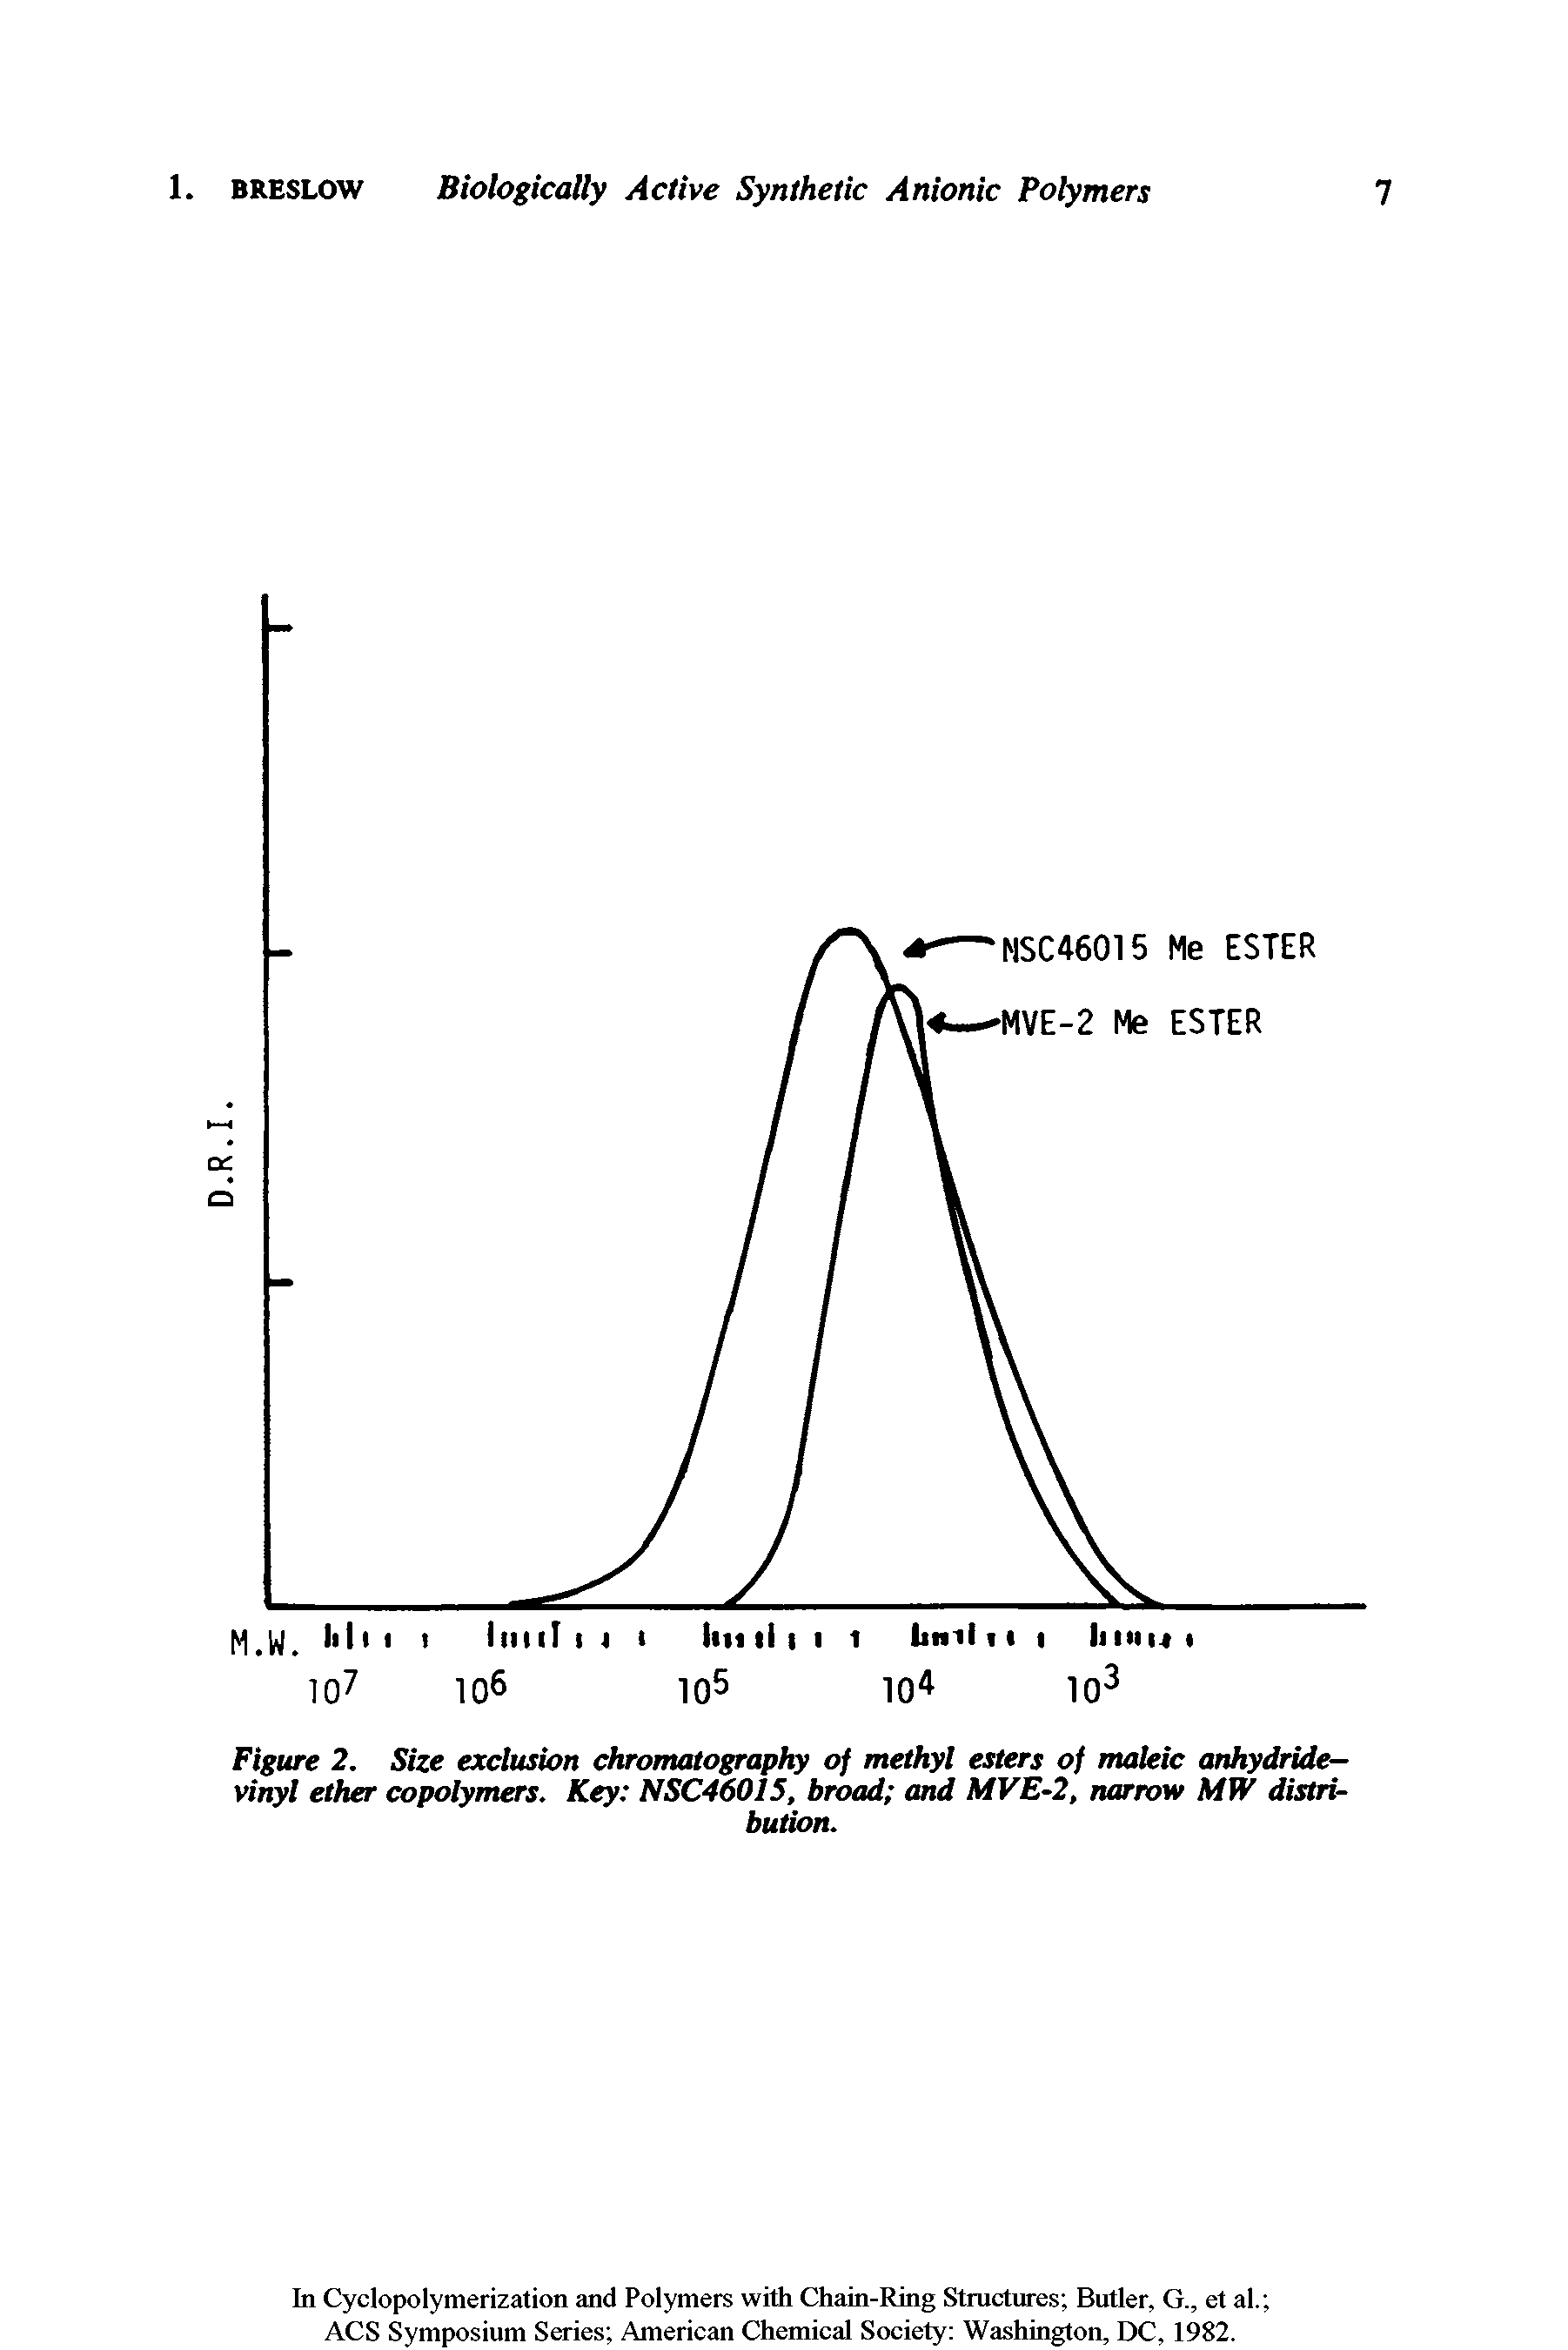 Figure 2. Size exclusion chromatography of methyl esters of maleic anhydride-vinyl ether copolymers. Key NSC46015, broad and MVE-2, narrow MW distribution.